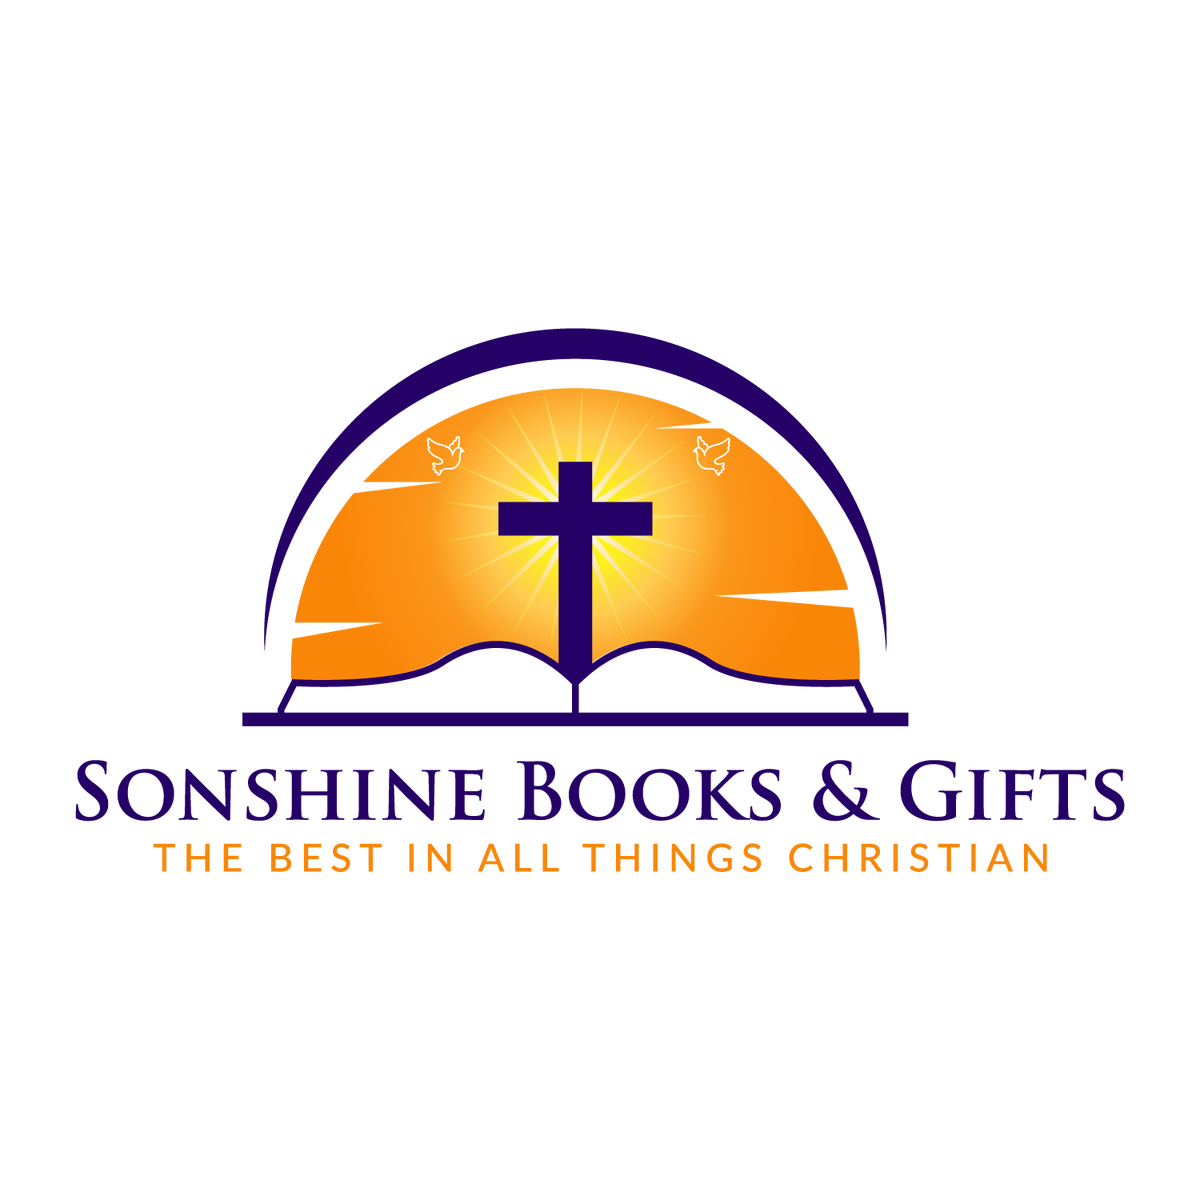 Sonshine Books & Gifts